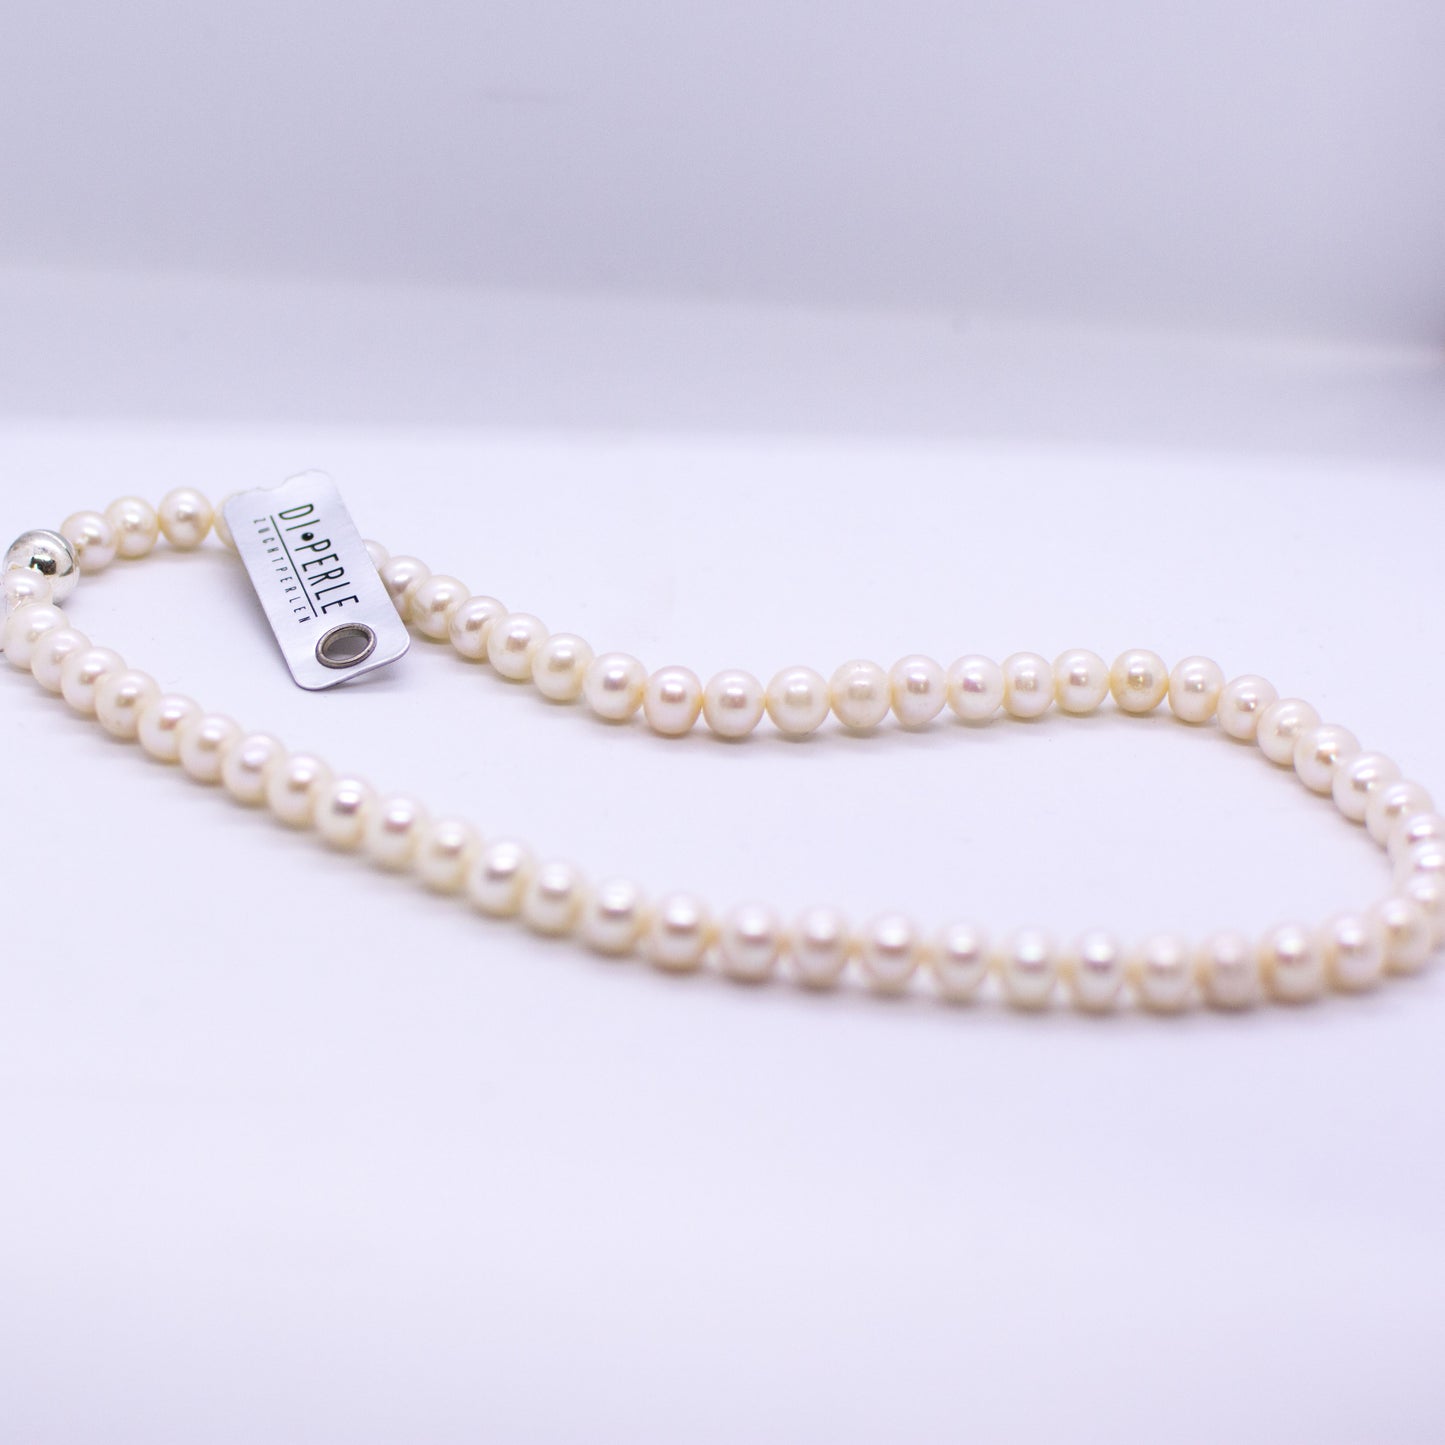 Cultured Freshwater Pearl Necklace - 7-8mm | 50cm - John Ross Jewellers